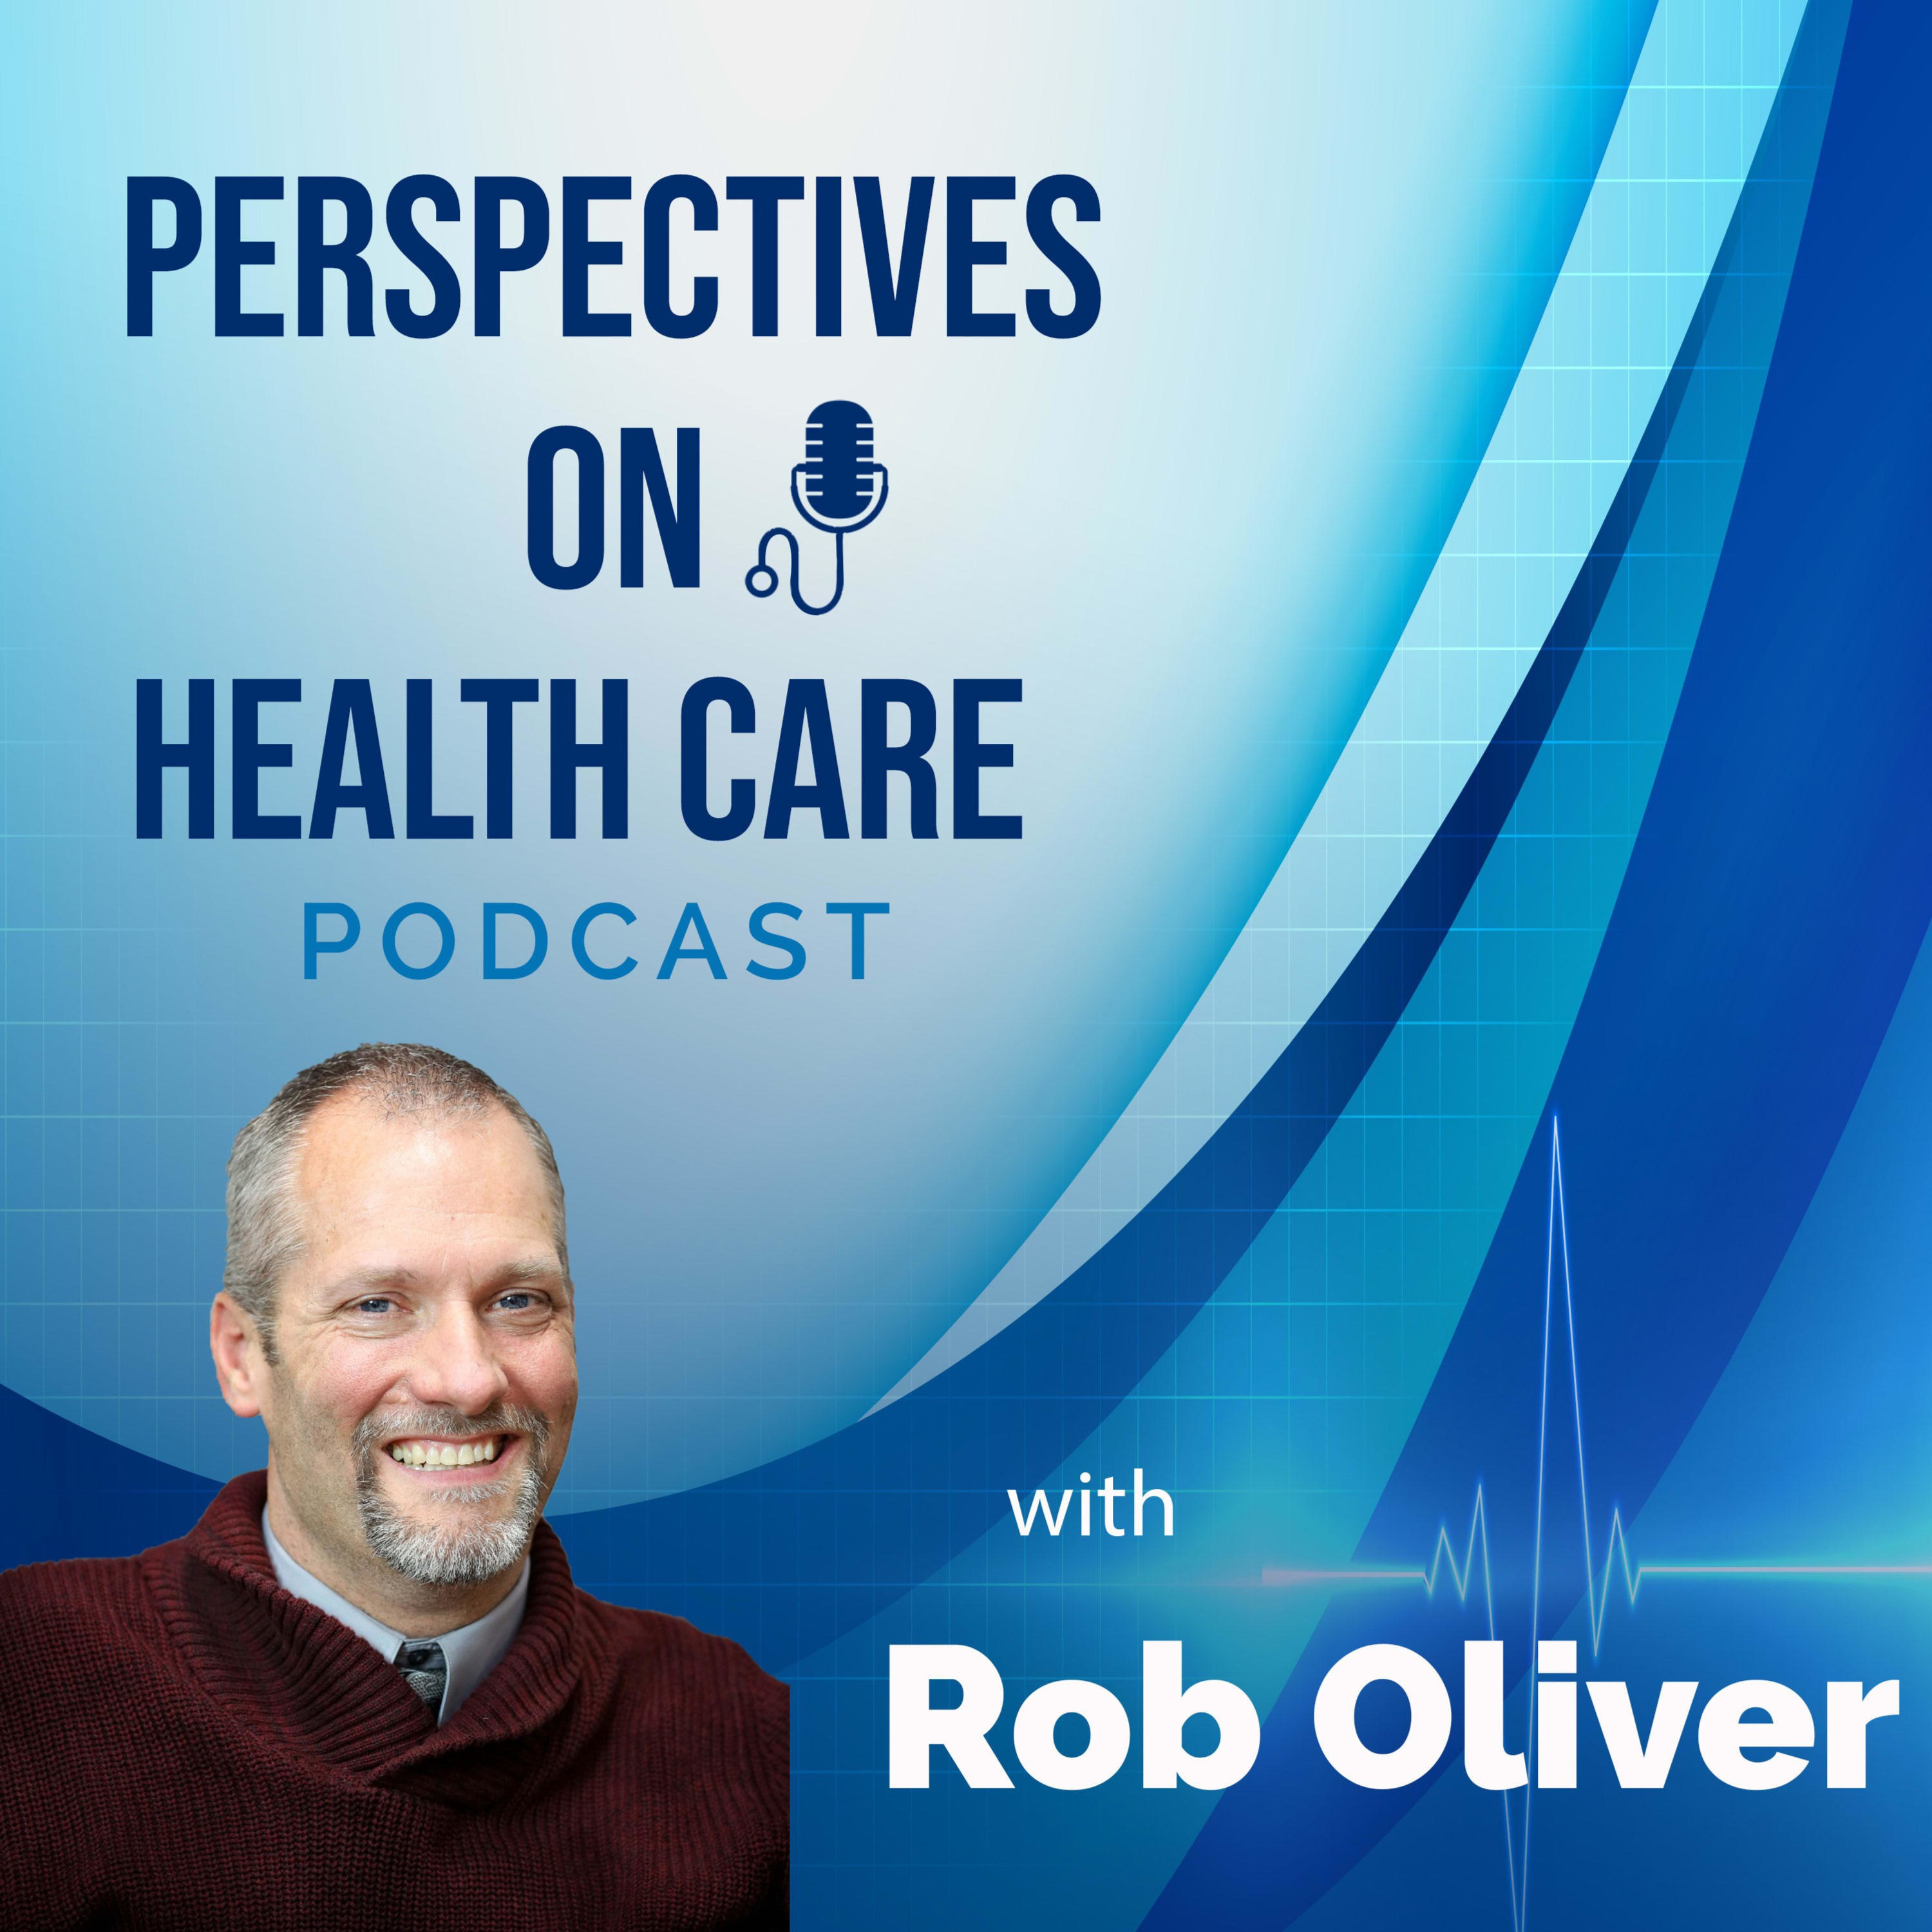 Lindsay Parks: An Osteopathic Family Physician's Perspective on Healthcare